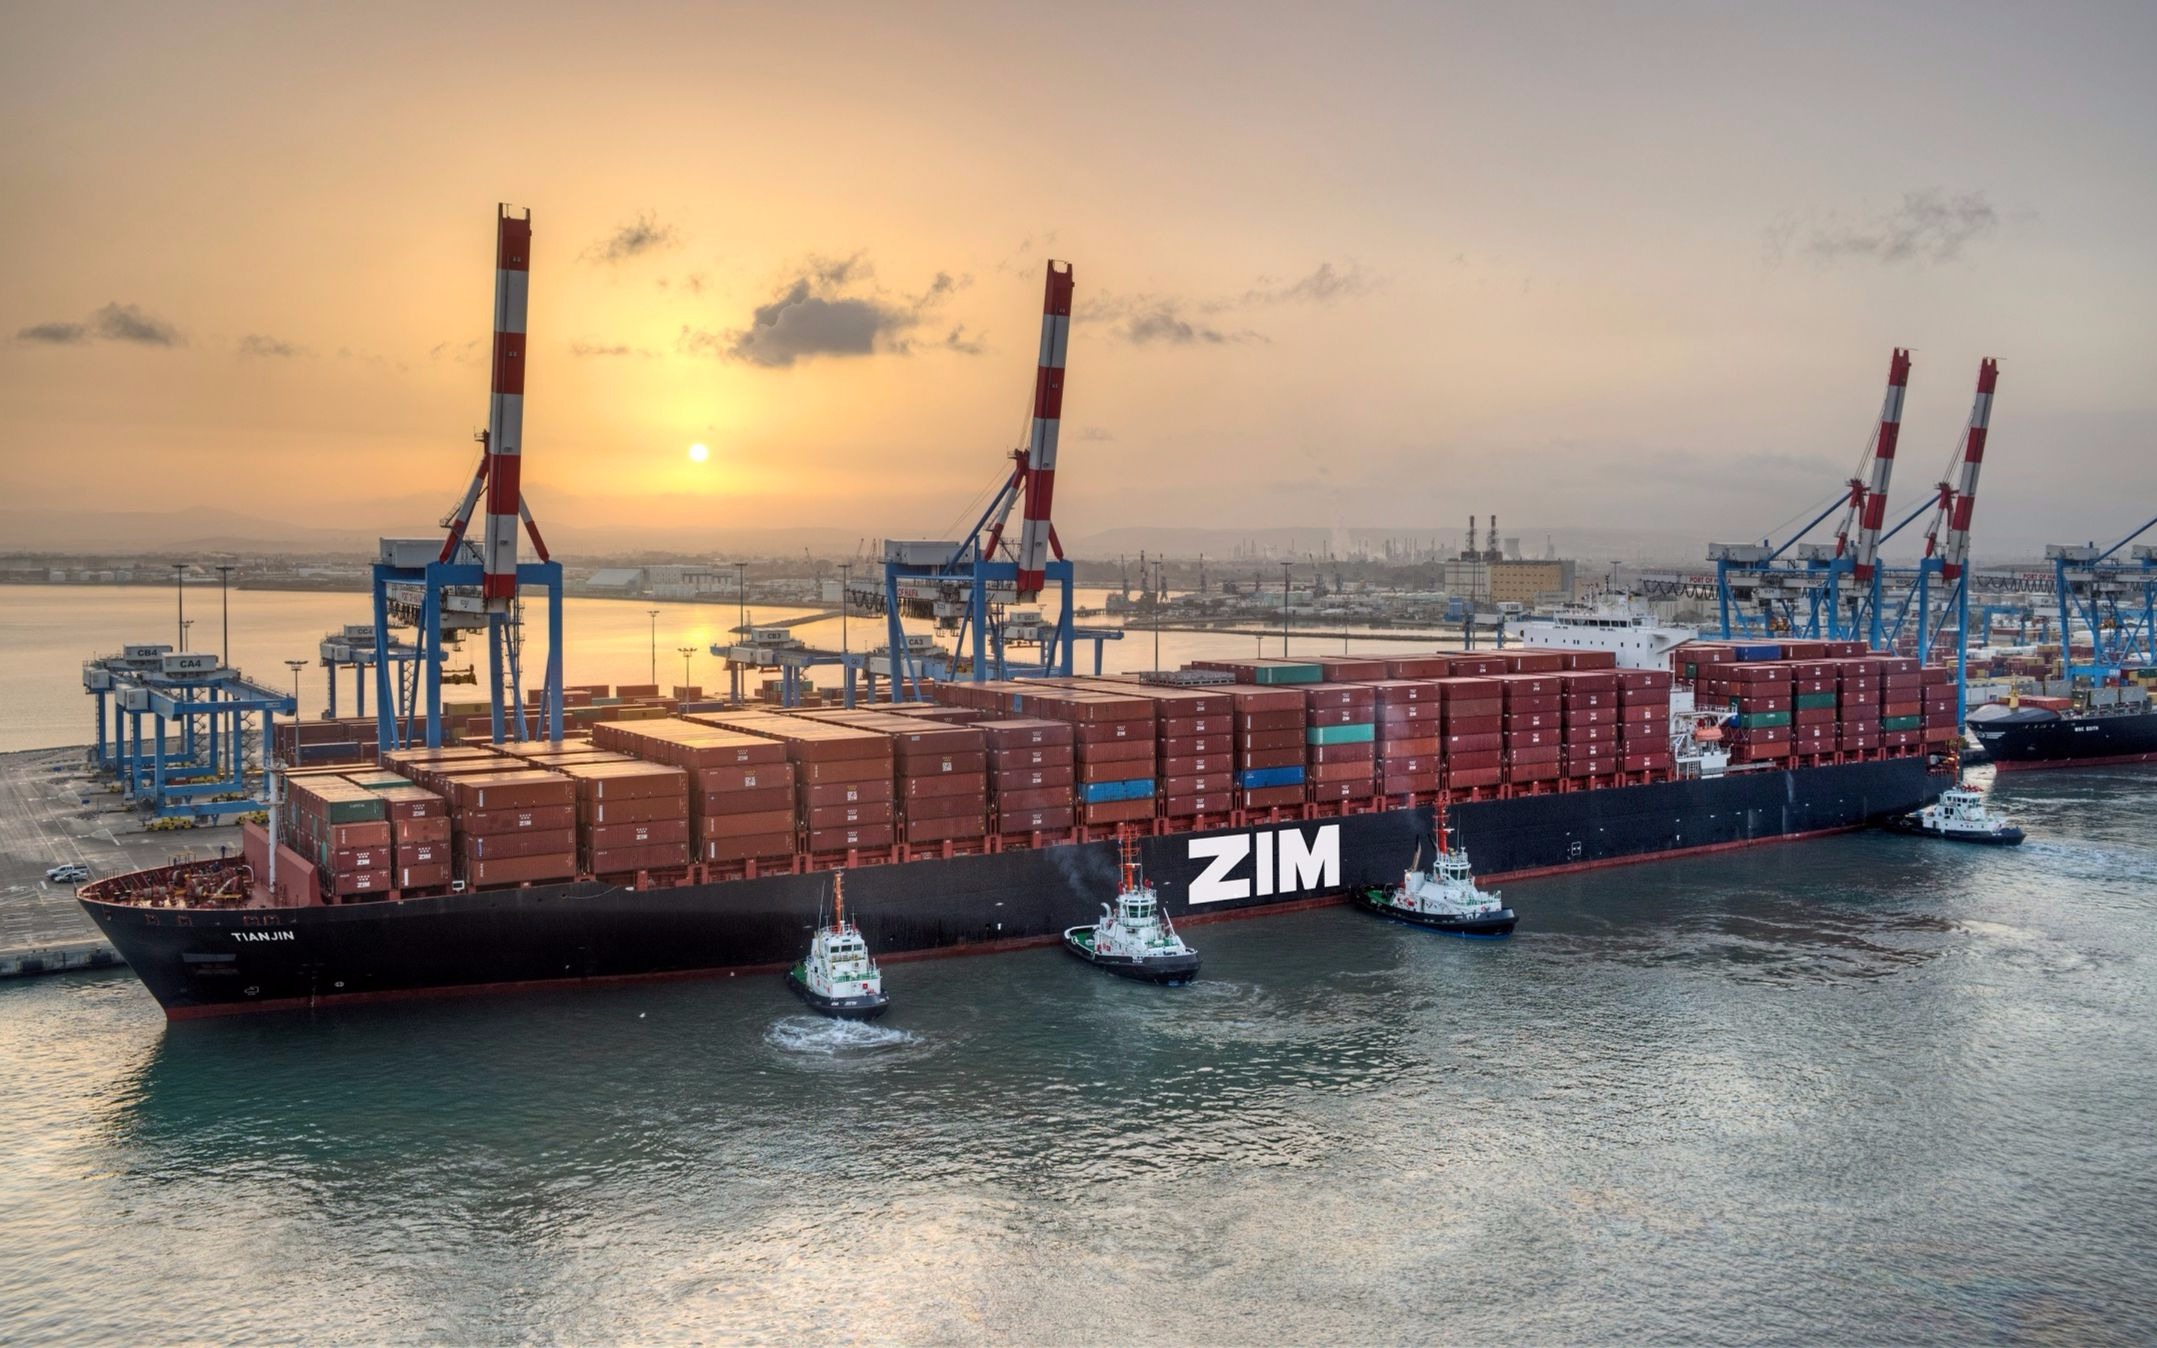 Israeli carrier ZIM supports e-bill of lading investments